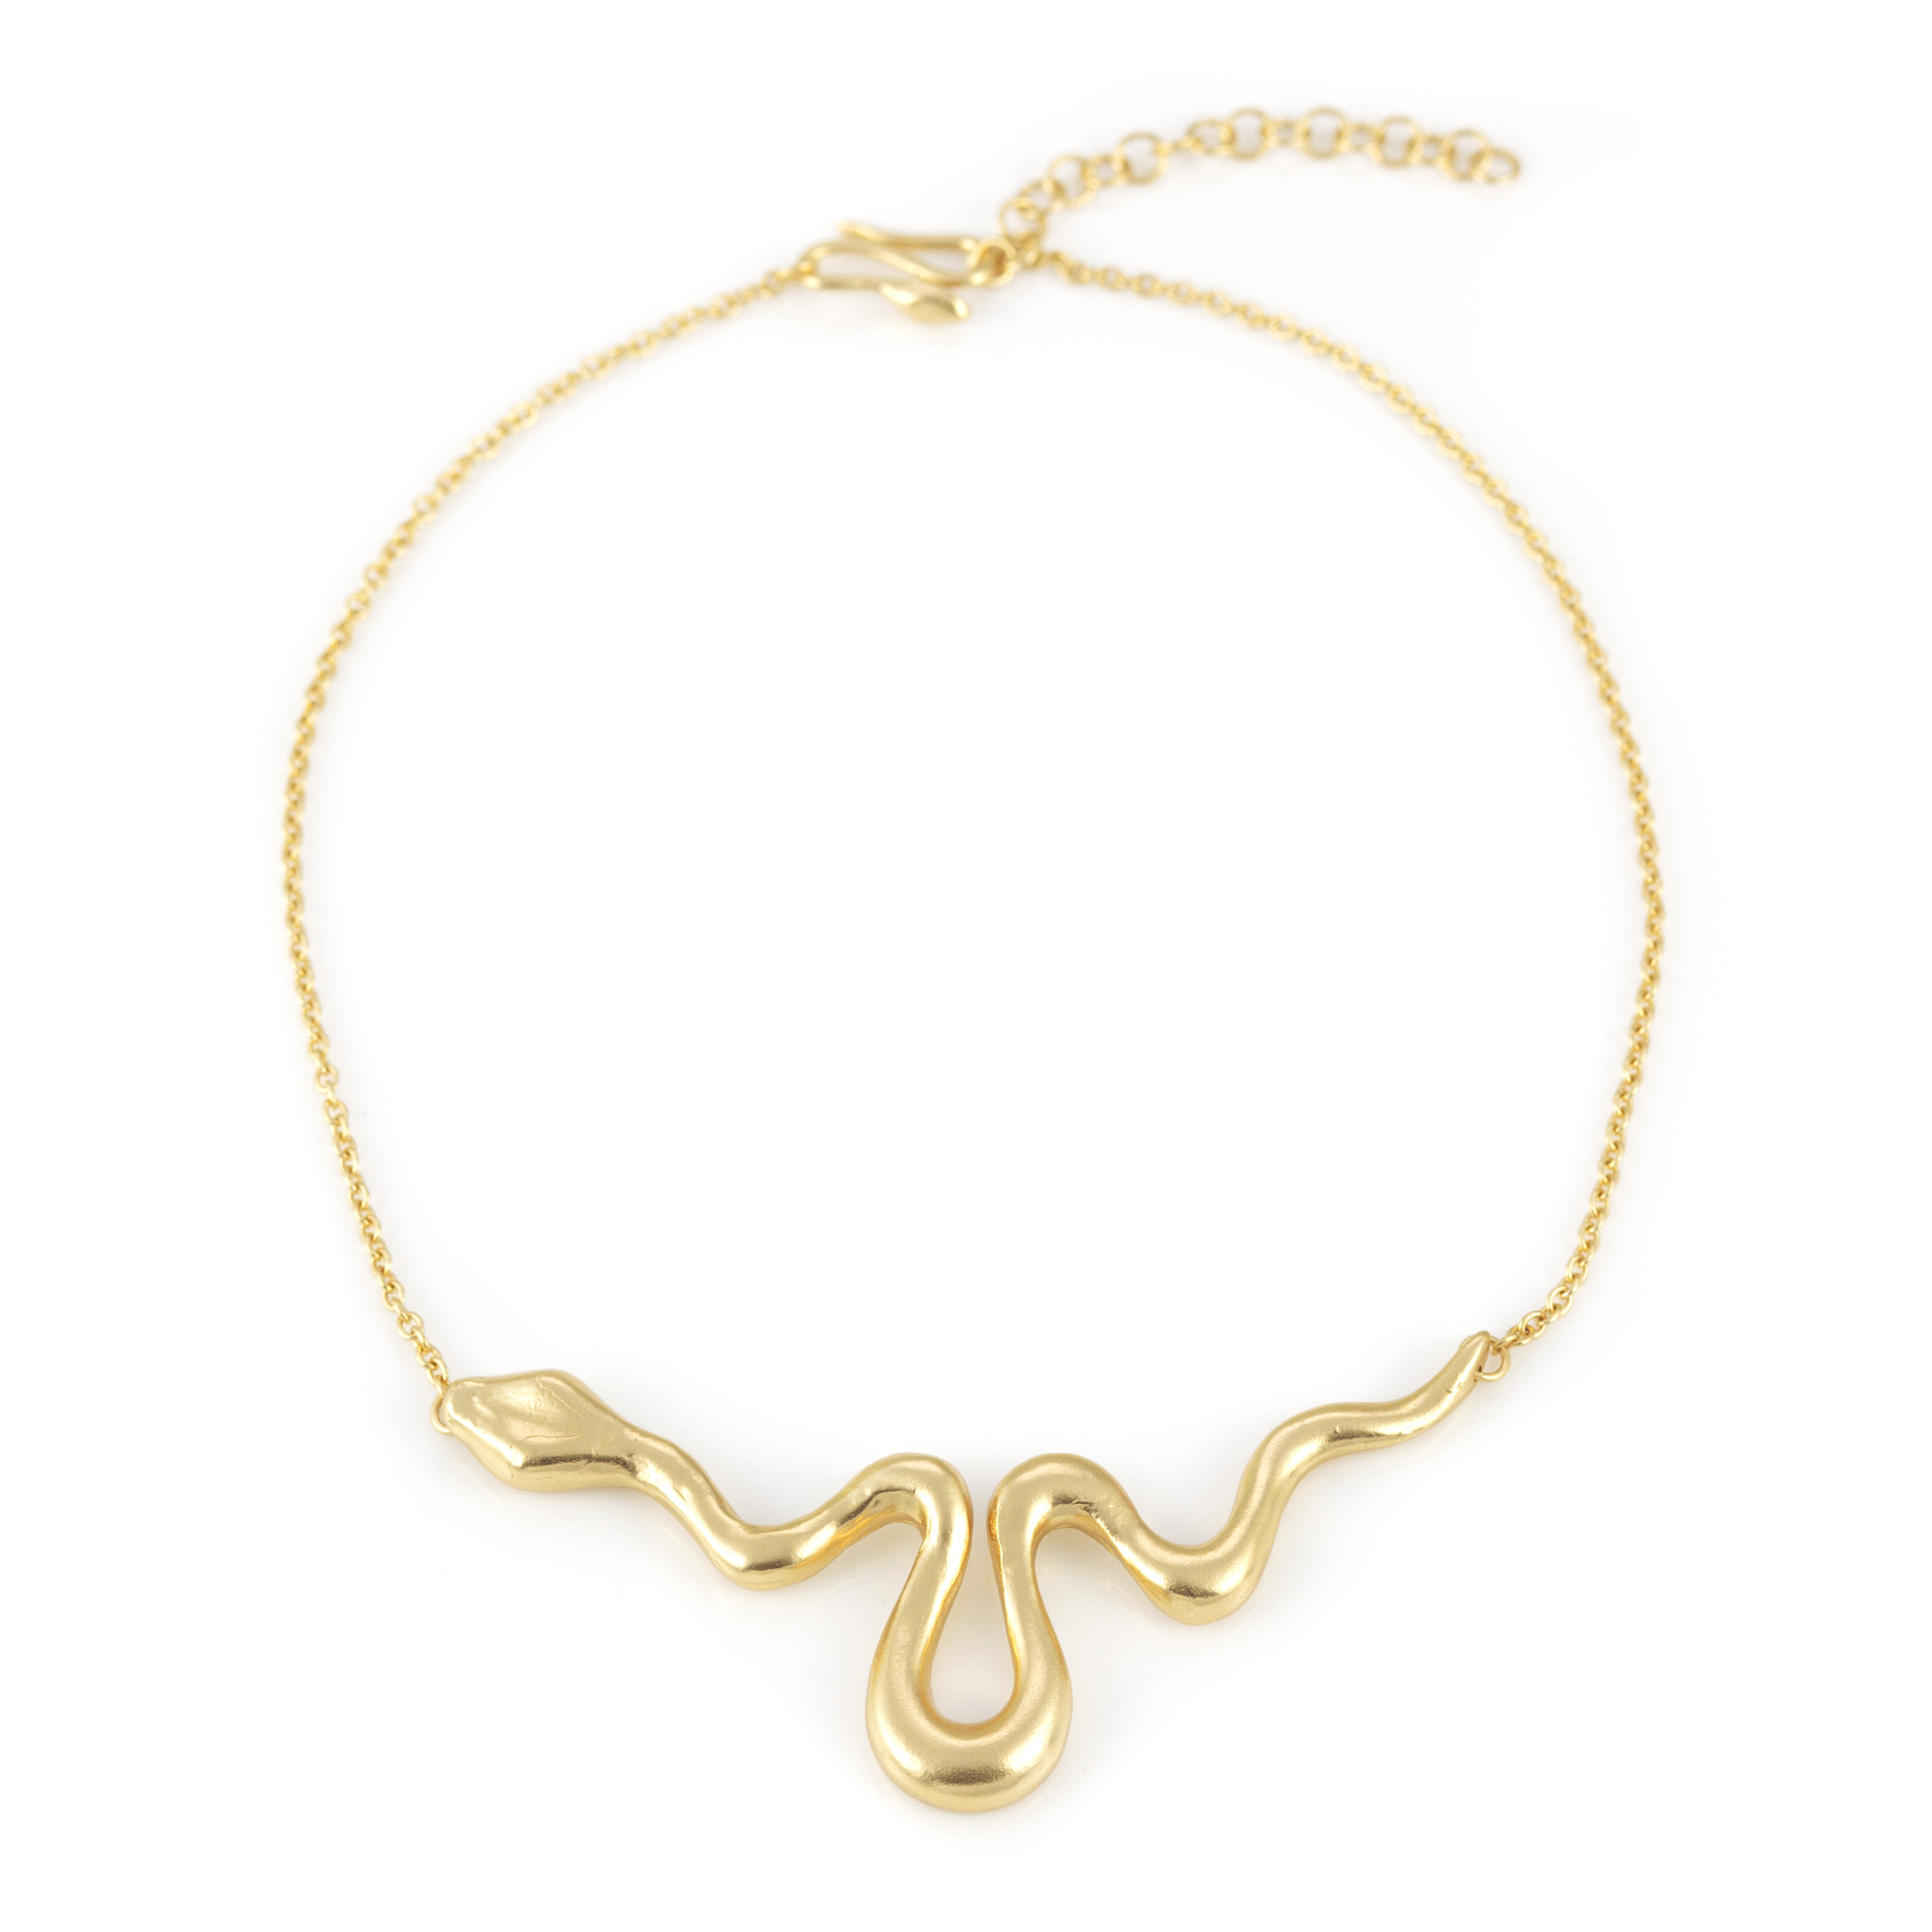 BODY_ribbon necklace L gold plated bronze